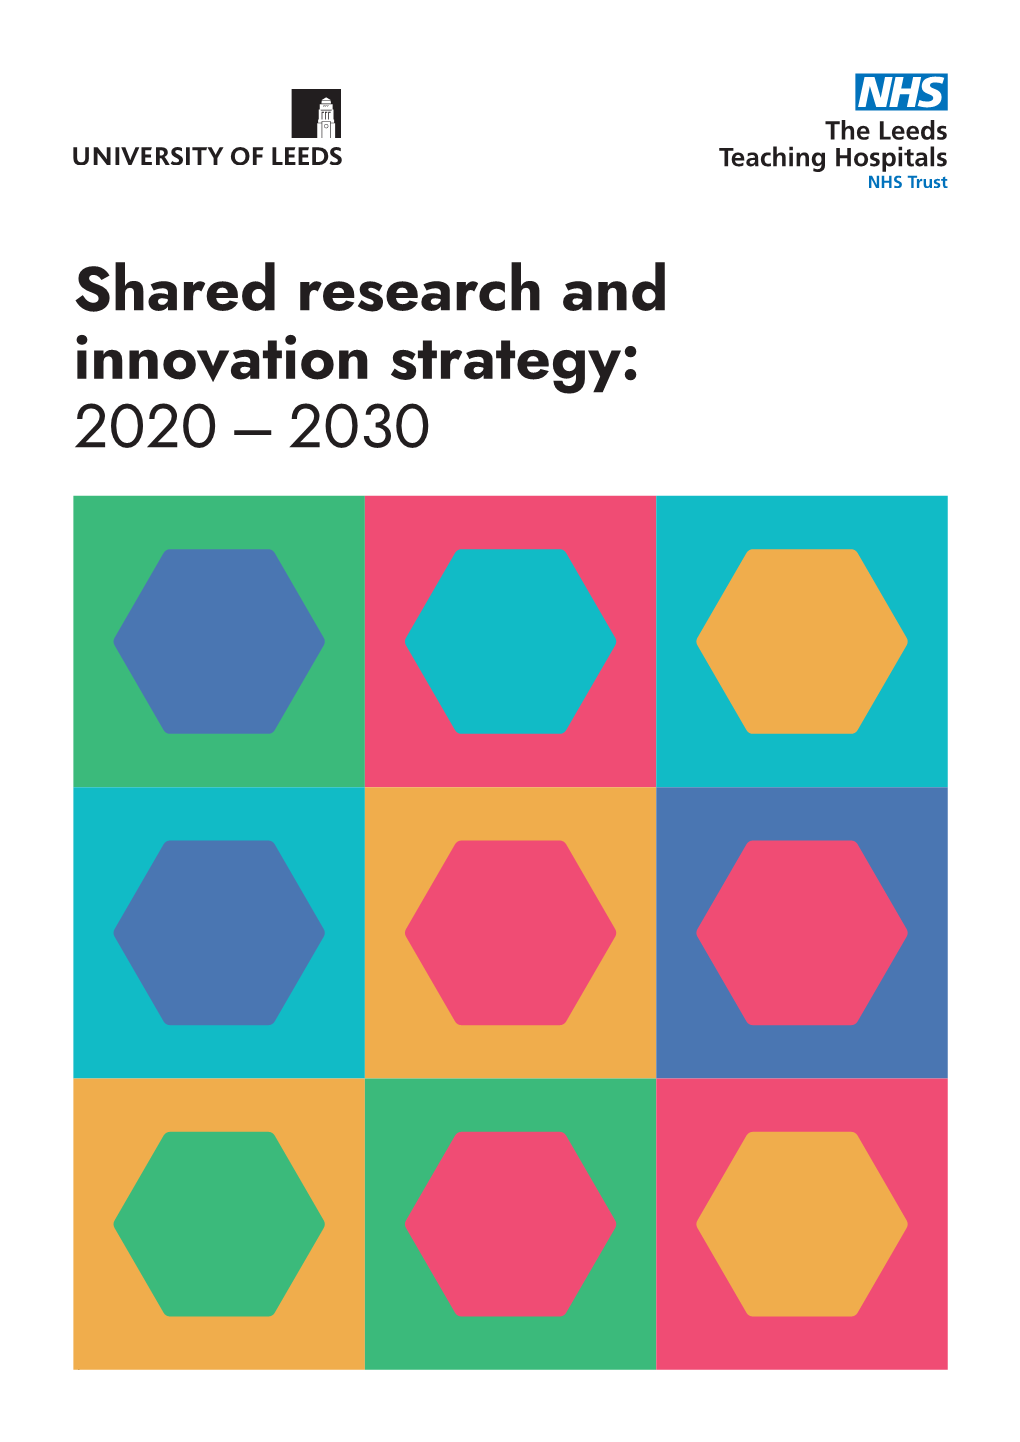 Shared Research and Innovation Strategy: 2020-2030